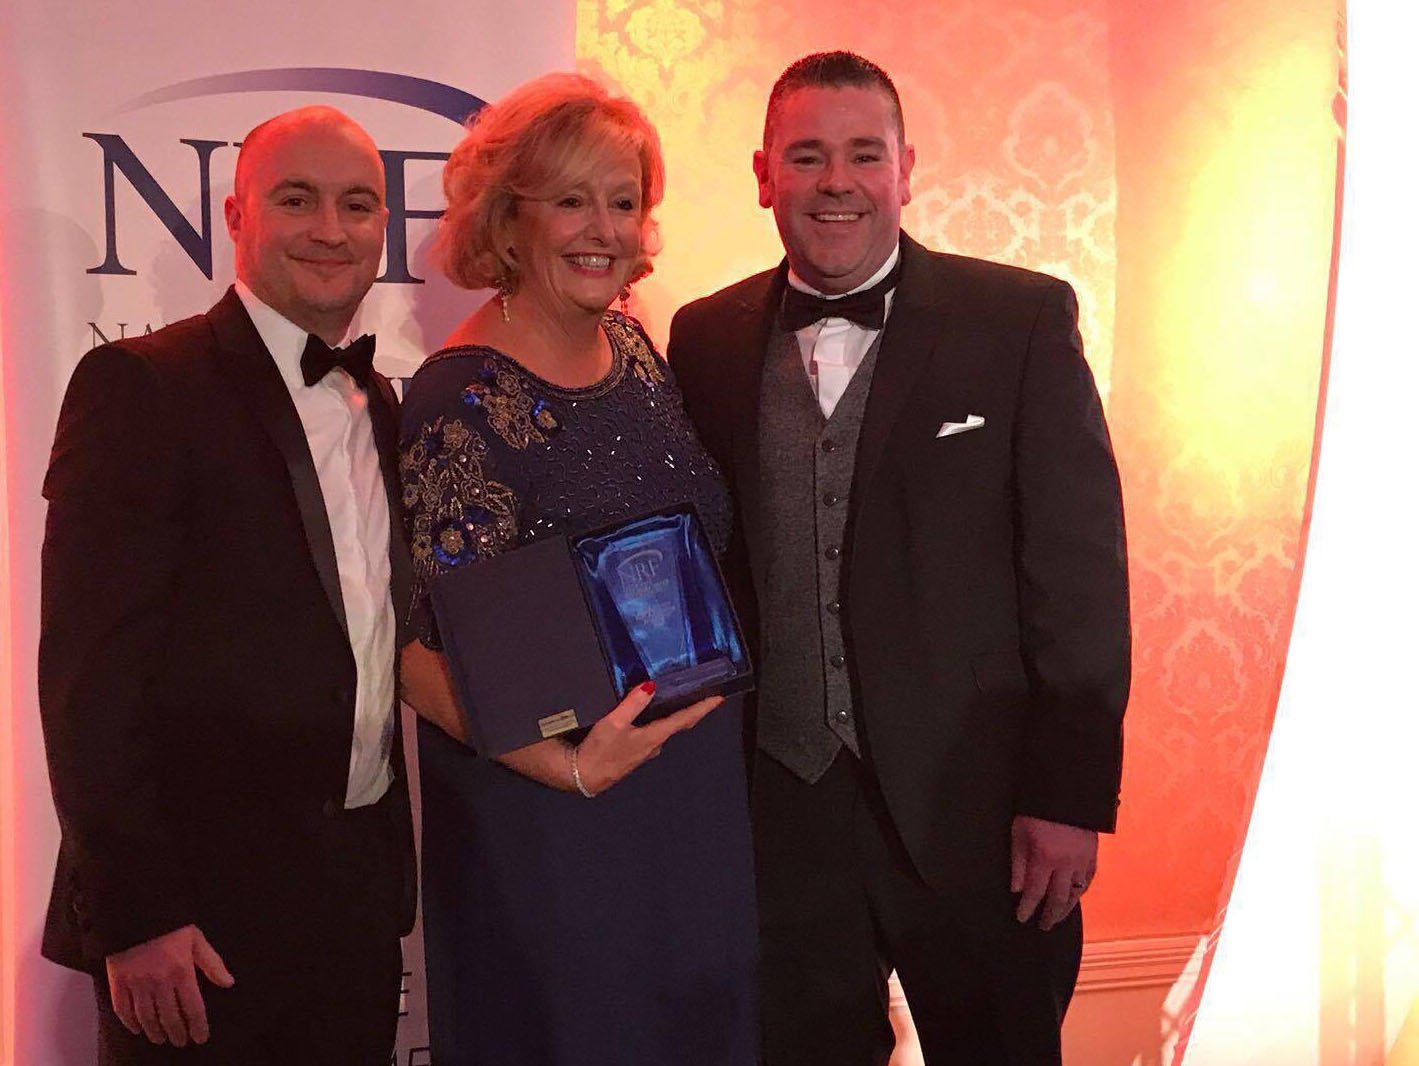 Mark Byrne, Commercial Director and Barbara McGrath, MD collect the award for Best in Practice (Sales Division) at the NRF Awards